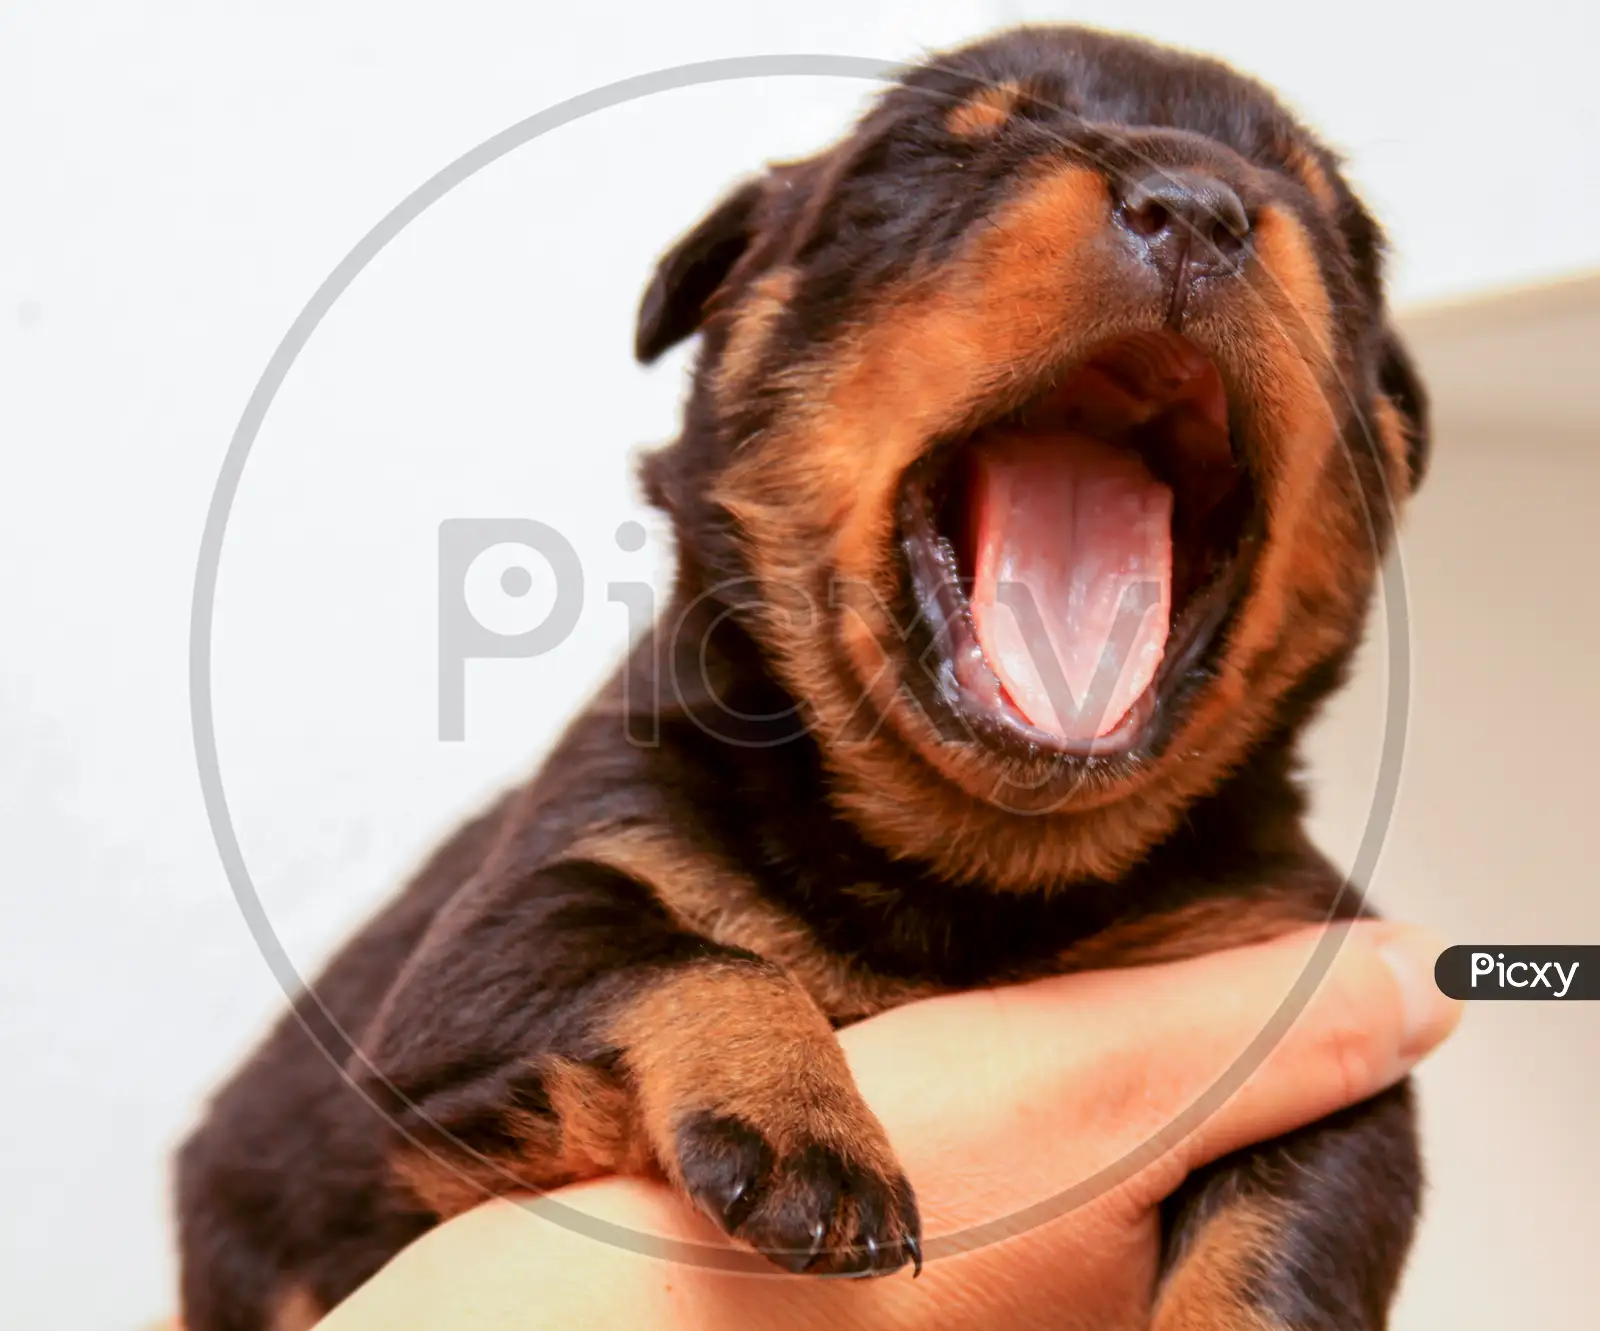 rottweiler mouth